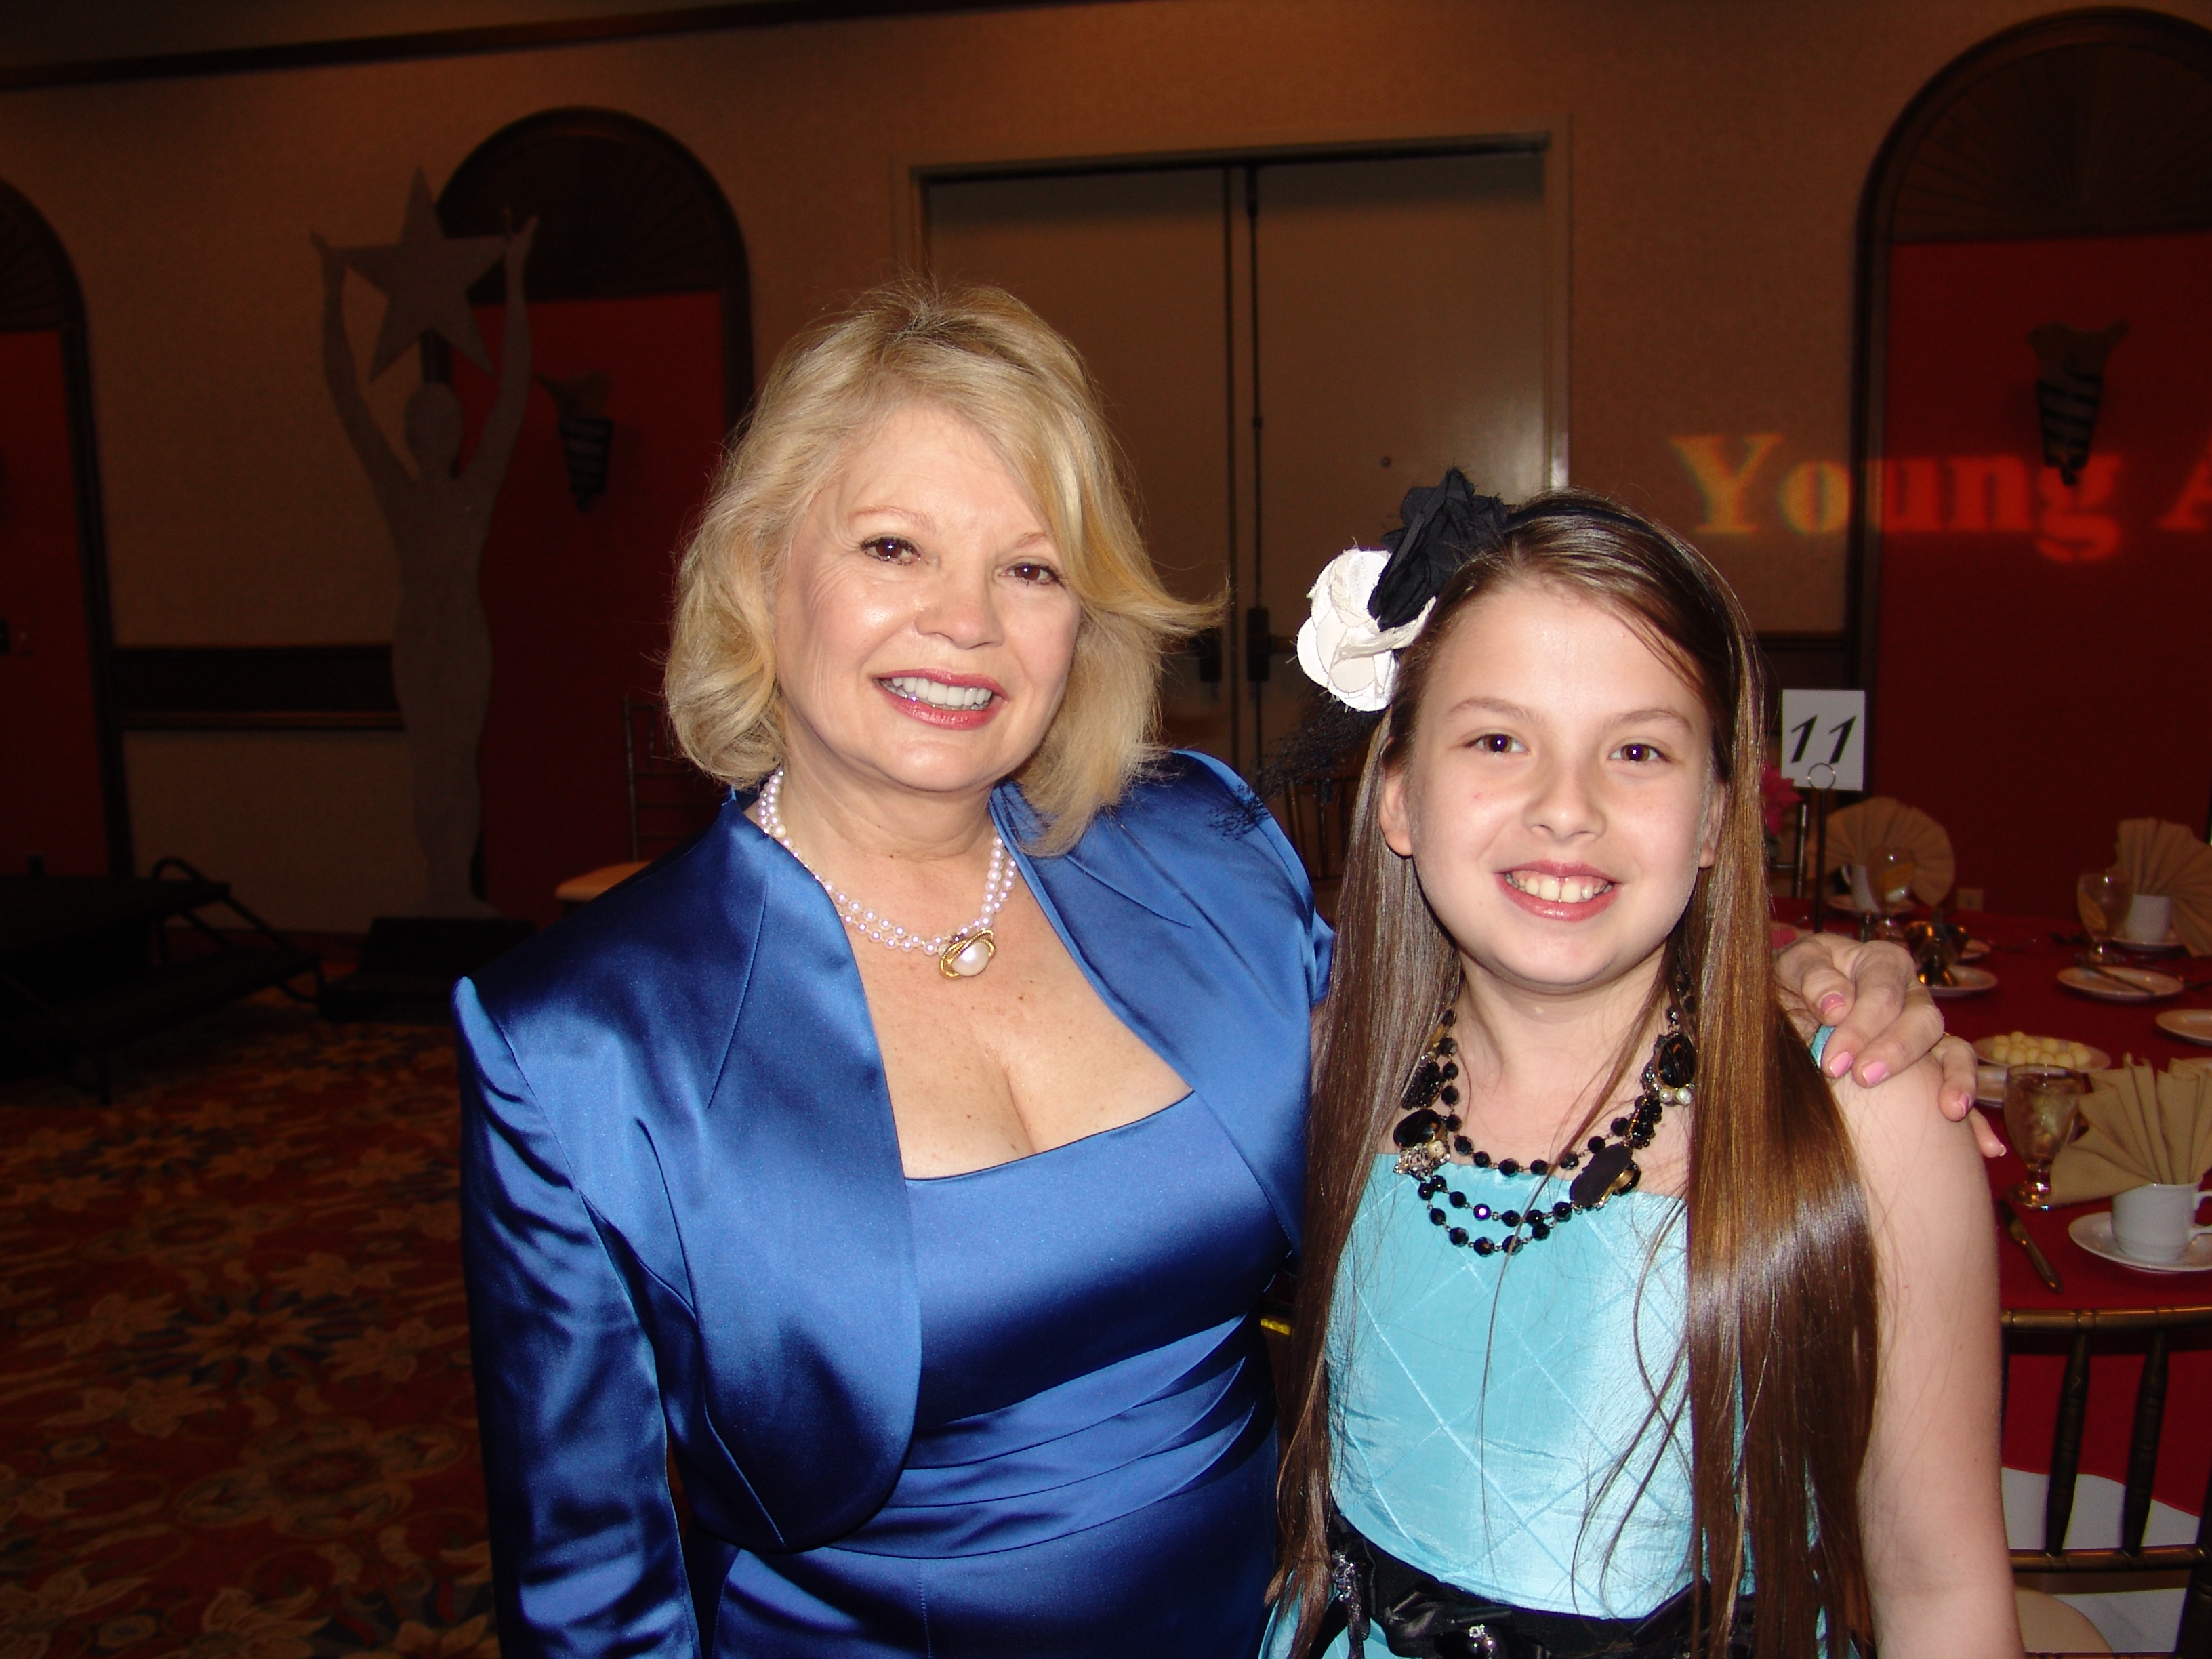 Kathy Garver (Cissy from Family Affair) and Cassidi Young Artist Awards April 11, 2010